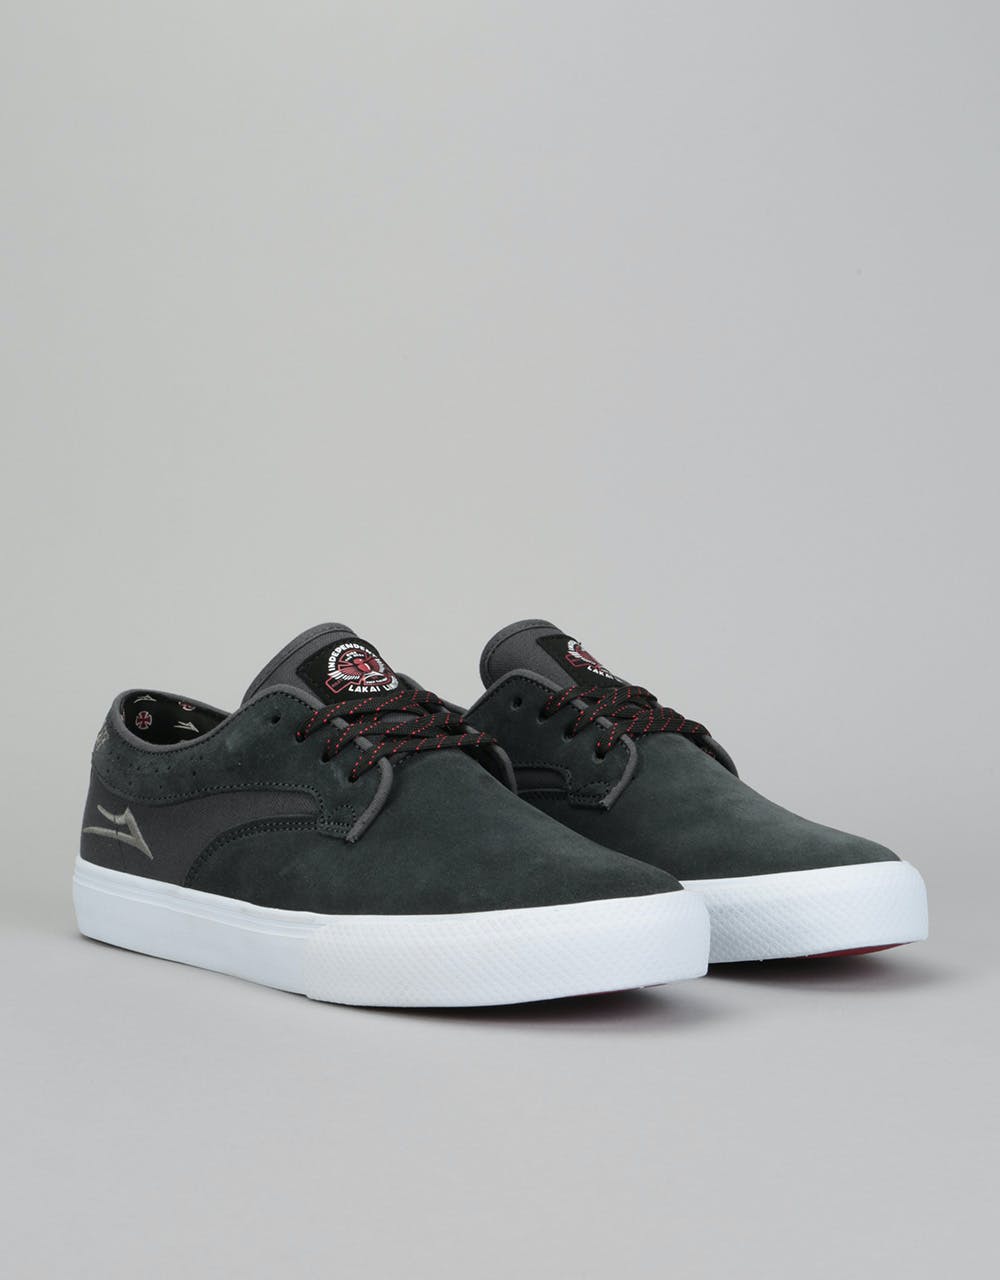 Lakai x Independent Riley Hawk Skate Shoes - Charcoal Suede